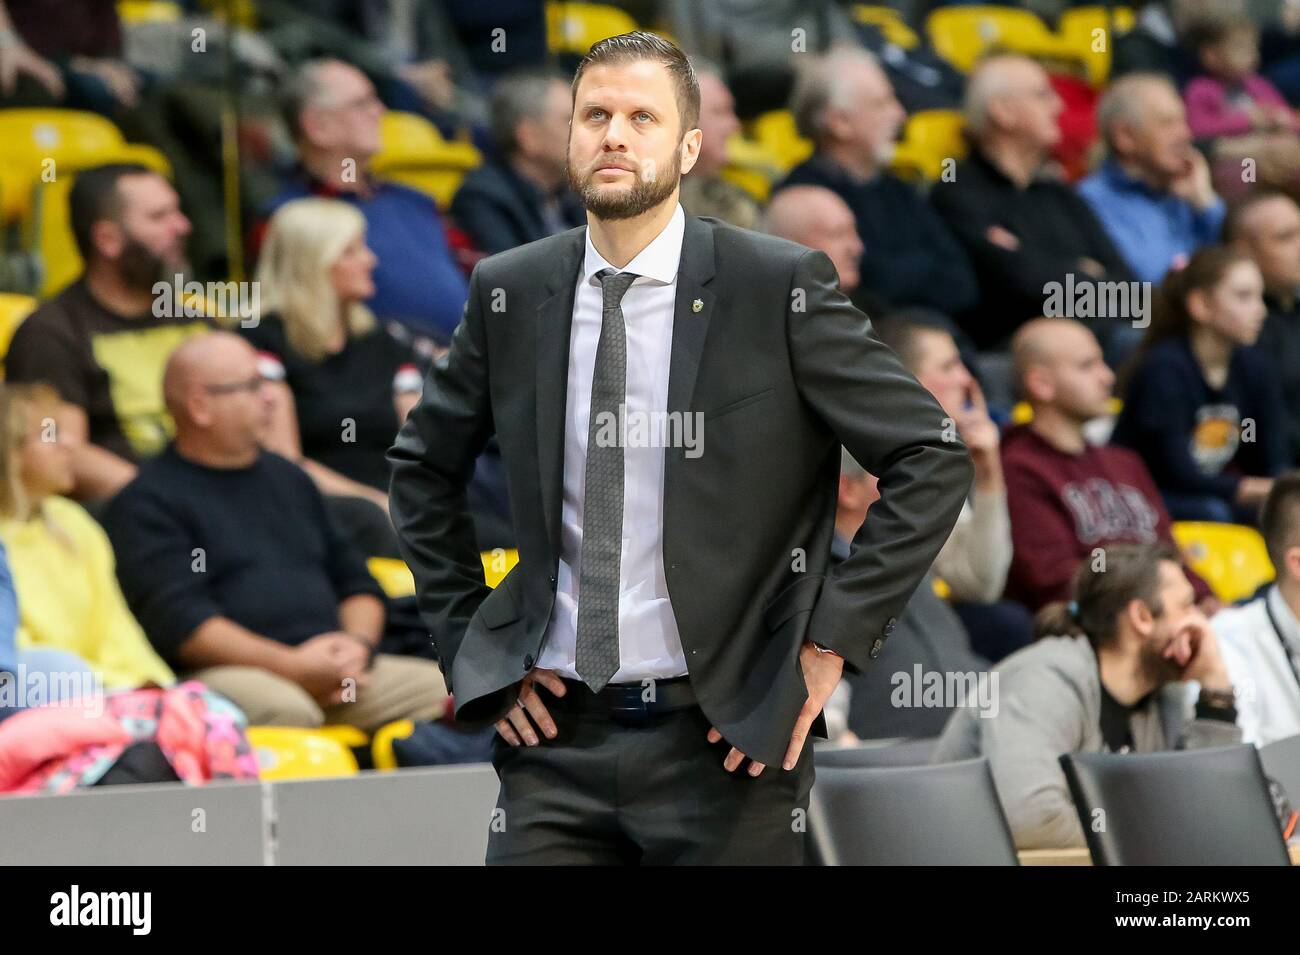 Gdynia, Poland. 28th Jan, 2020. David Gaspar (trener/coach) seen in action during EuroLeague Women group B match between Asseco Arka Gdynia and Sopron Basket in Gdynia.(Final score: Arka Gdynia 67:77 Sopron Basket). Credit: SOPA Images Limited/Alamy Live News Stock Photo